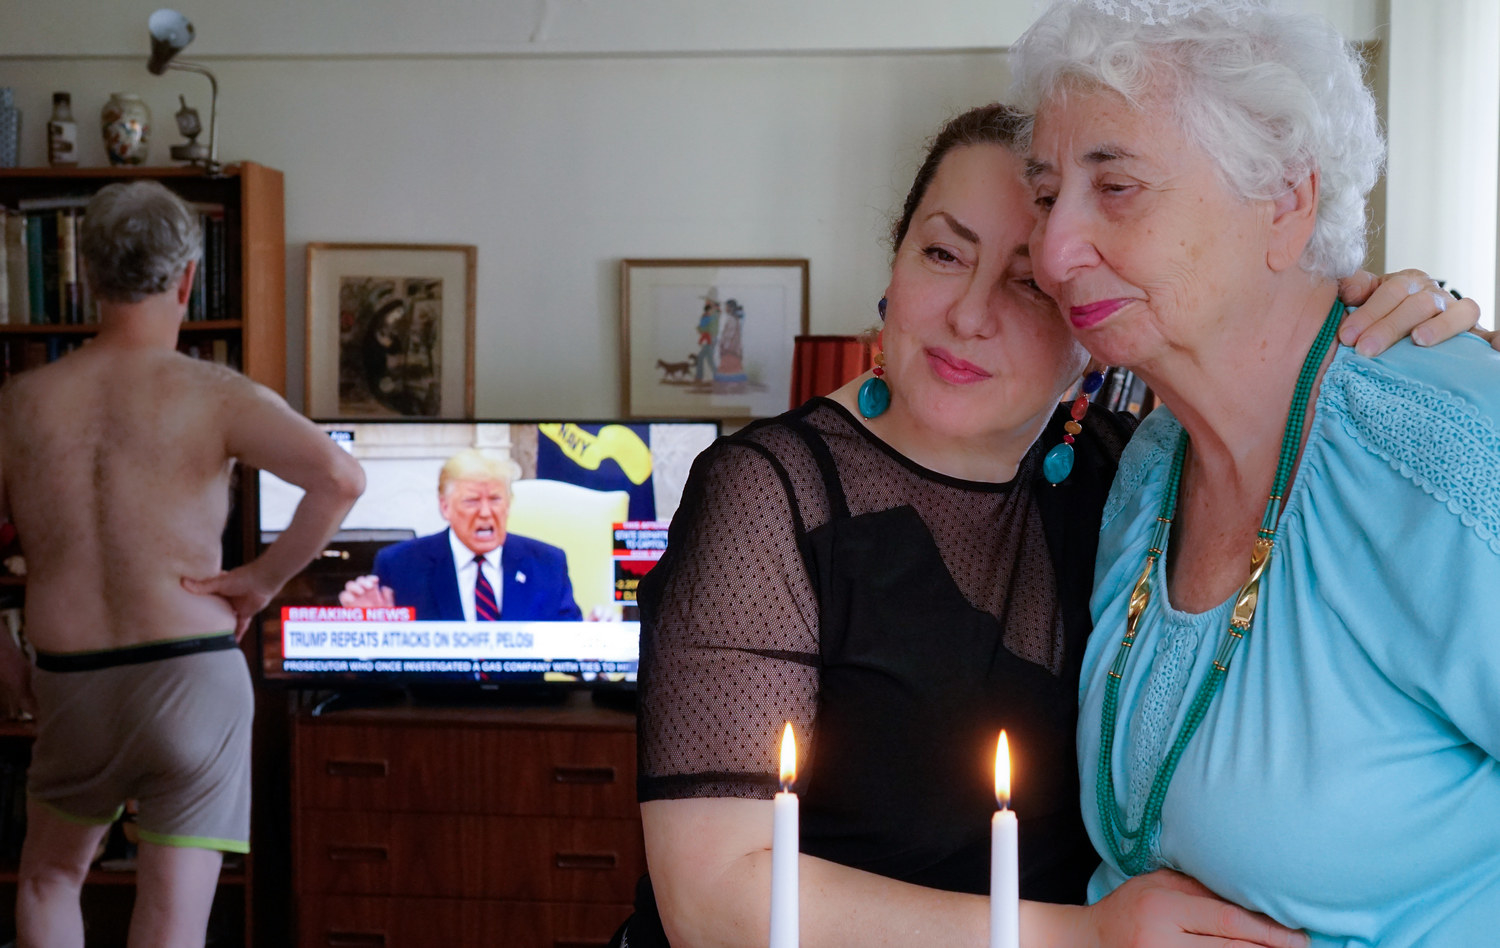 A man in his underwear watches Trump on TV while two women embrace in the foreground